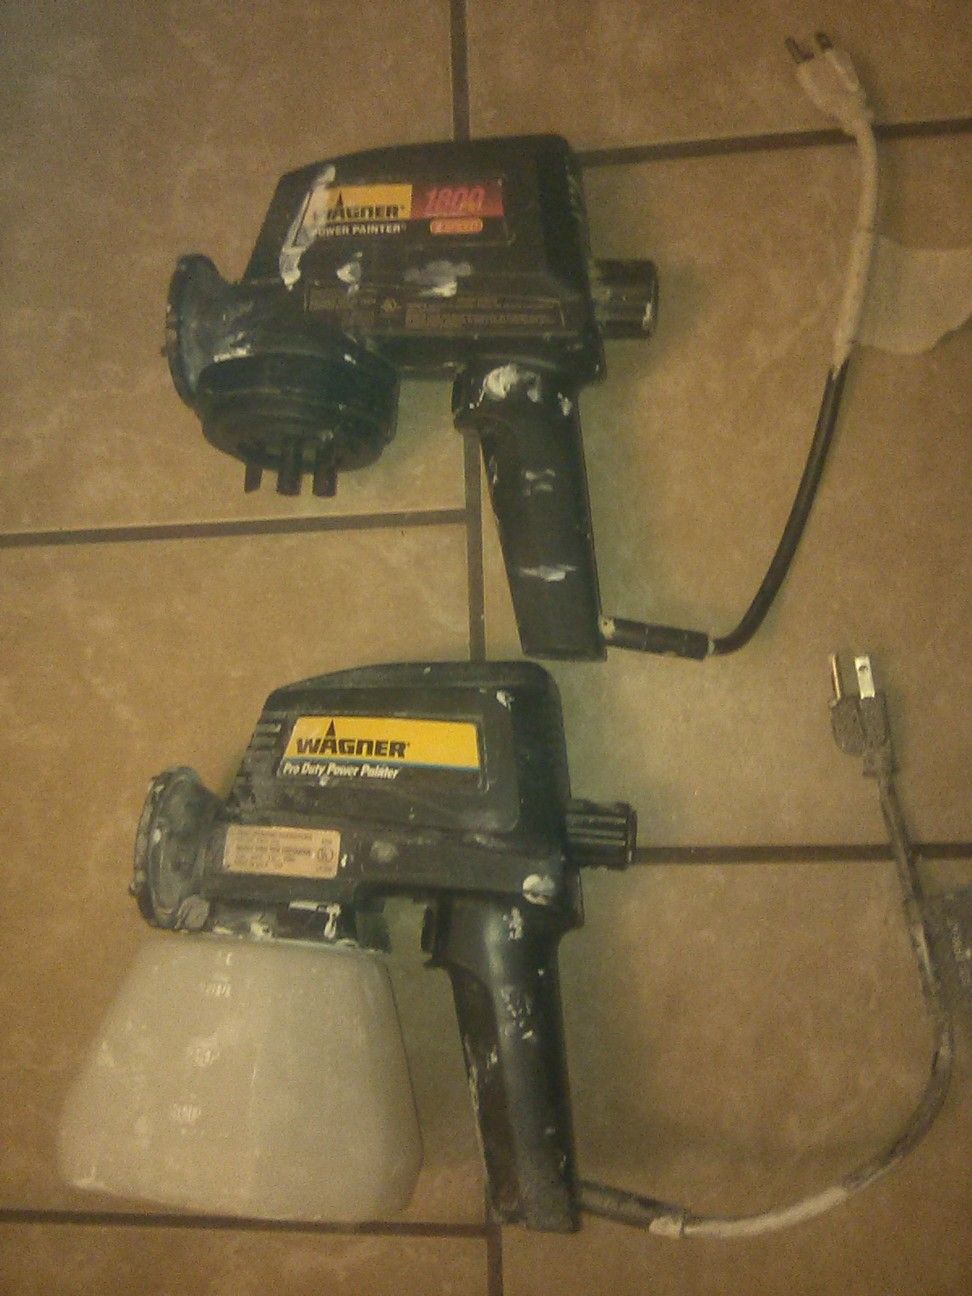 Two Wagner power paint sprayers